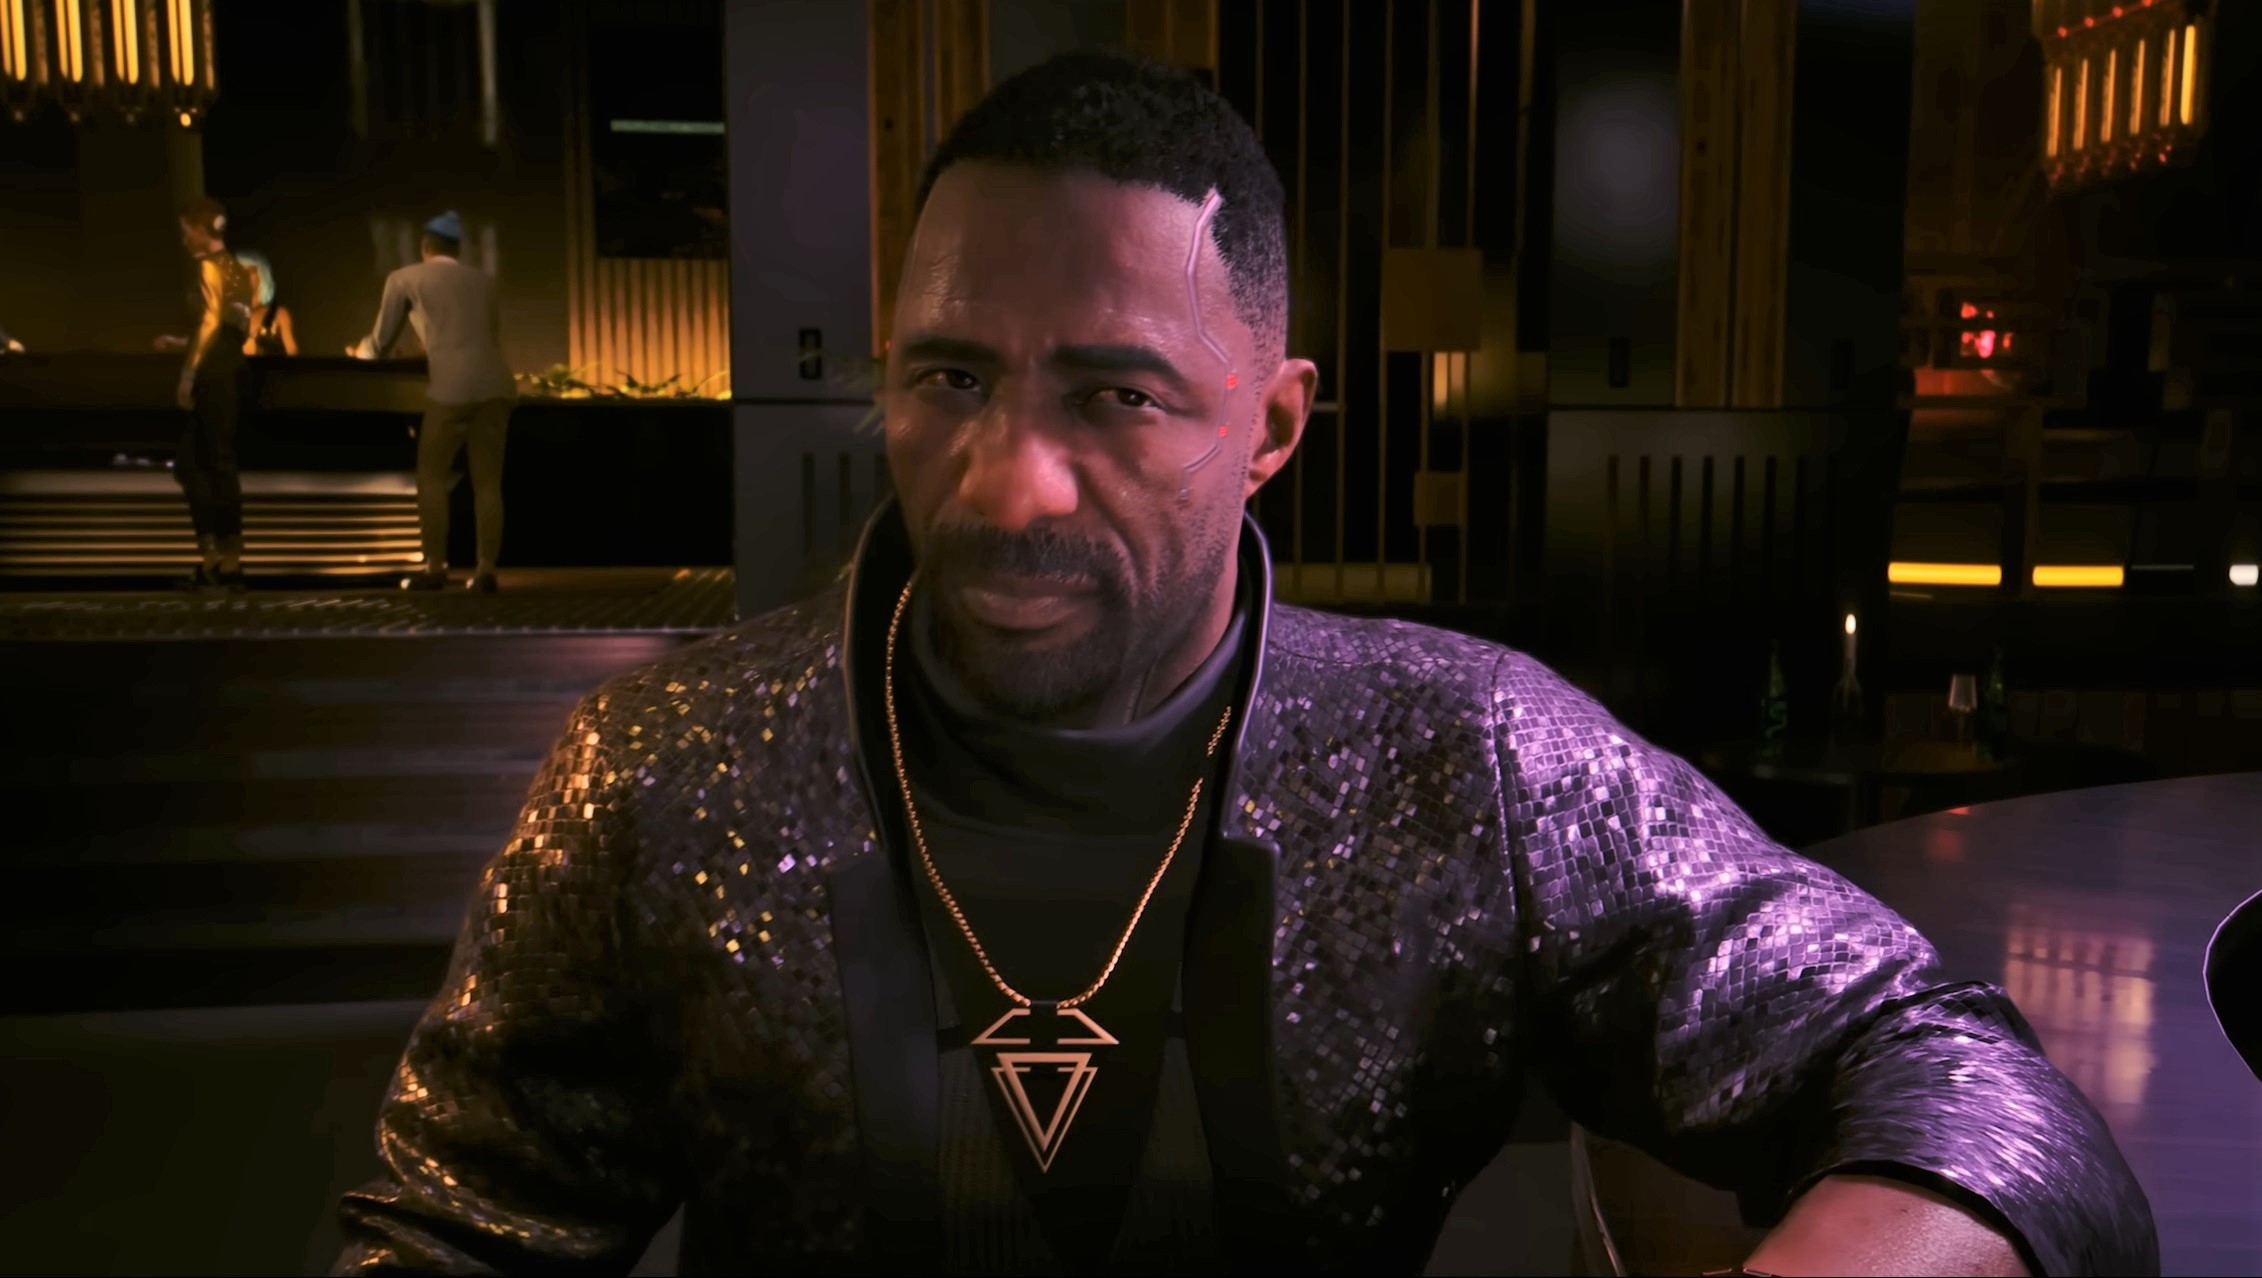 It turns out you can find Idris Elba’s Cyberpunk 2077 character hanging out and working a regular job in Night City before the expansion starts